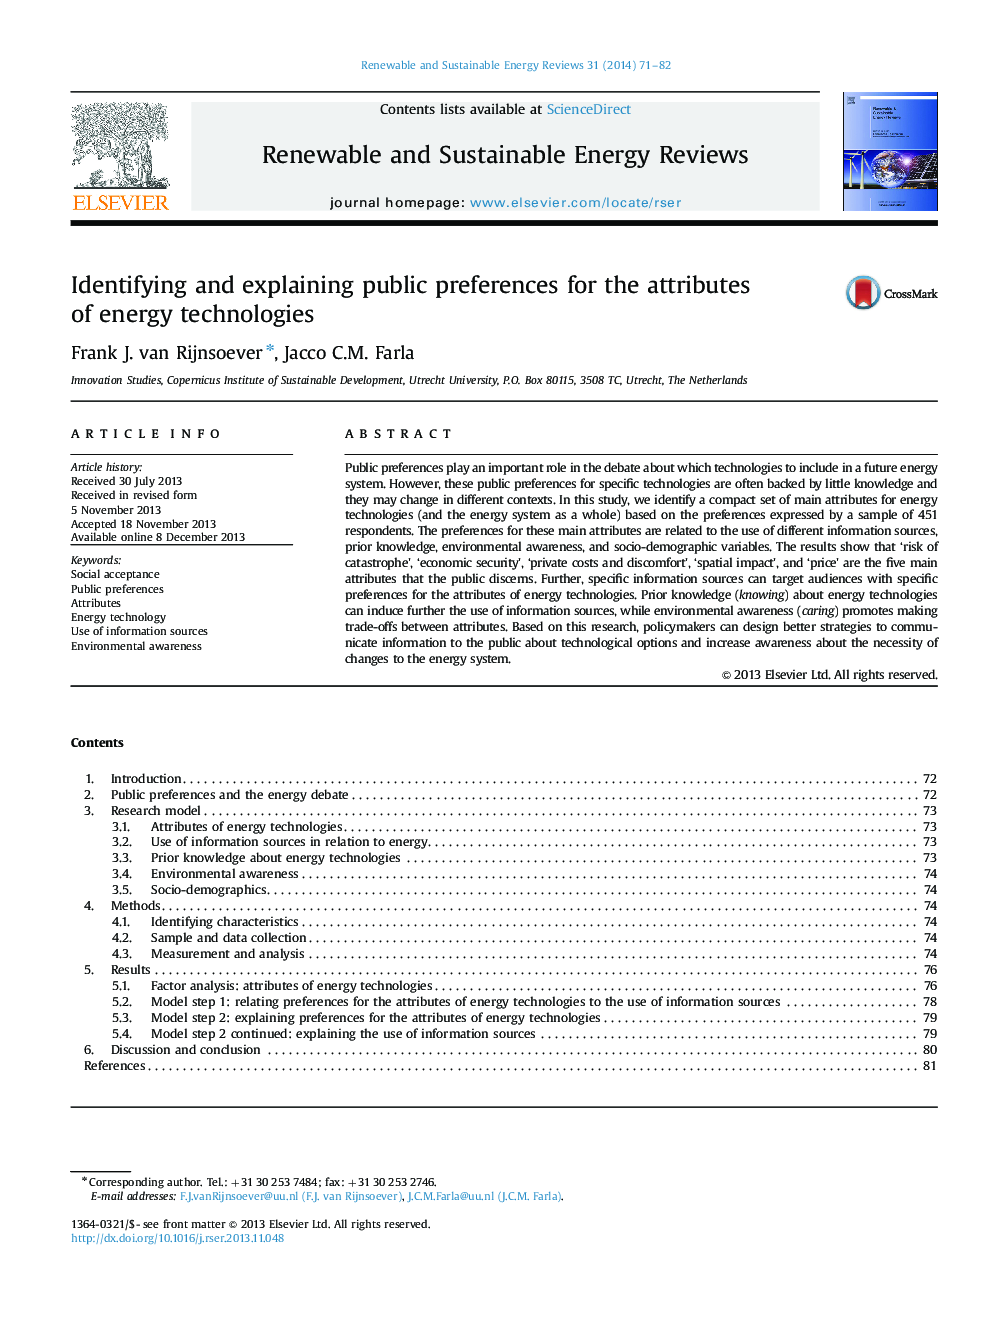 Identifying and explaining public preferences for the attributes of energy technologies